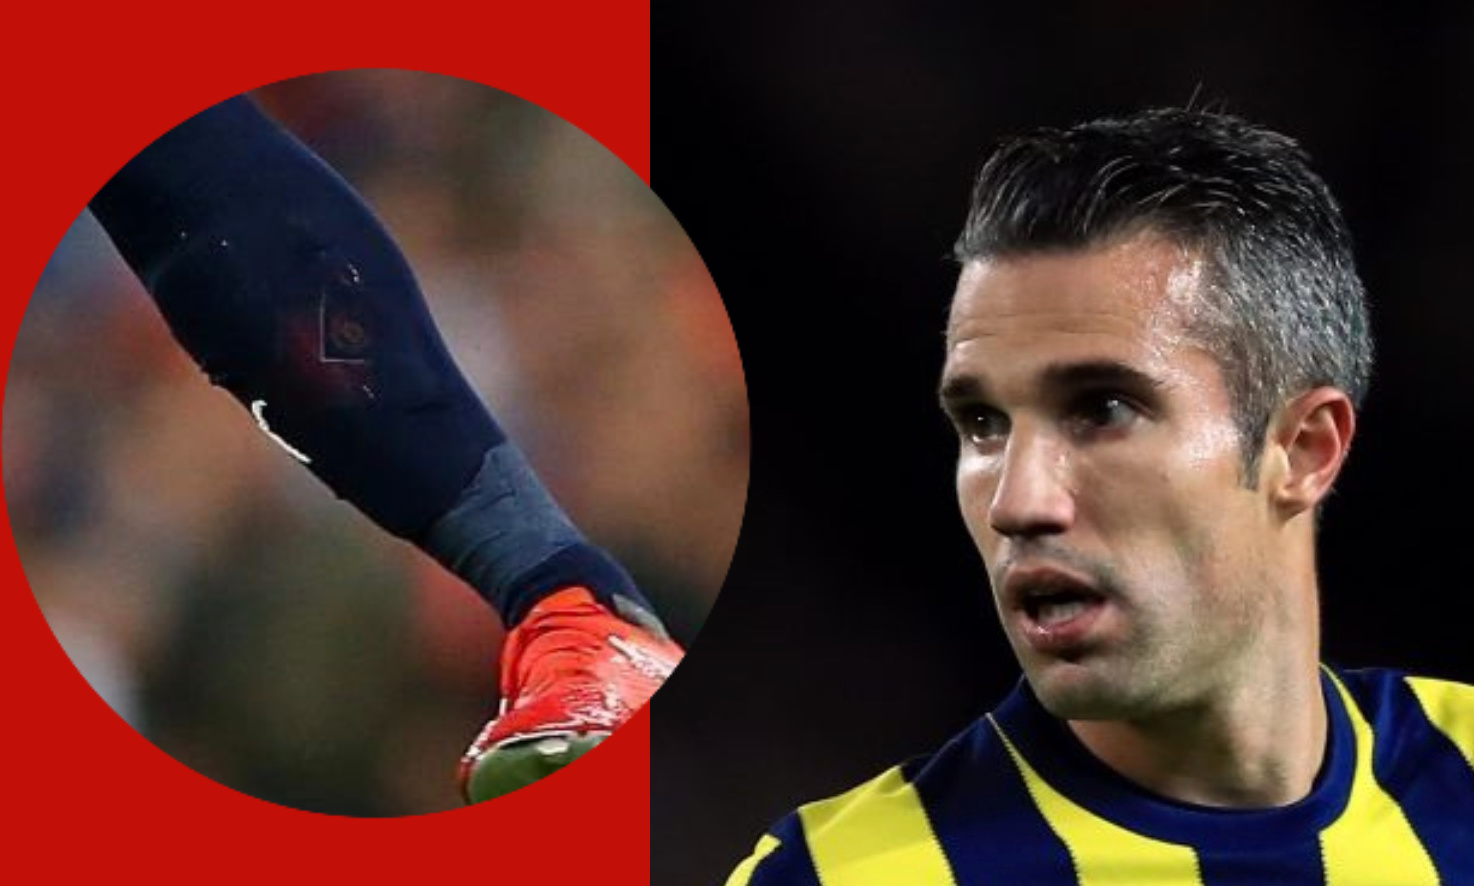 Red Devil for life – Robin van Persie rocks up in Manchester United shin pads at Kompany’s testimonial